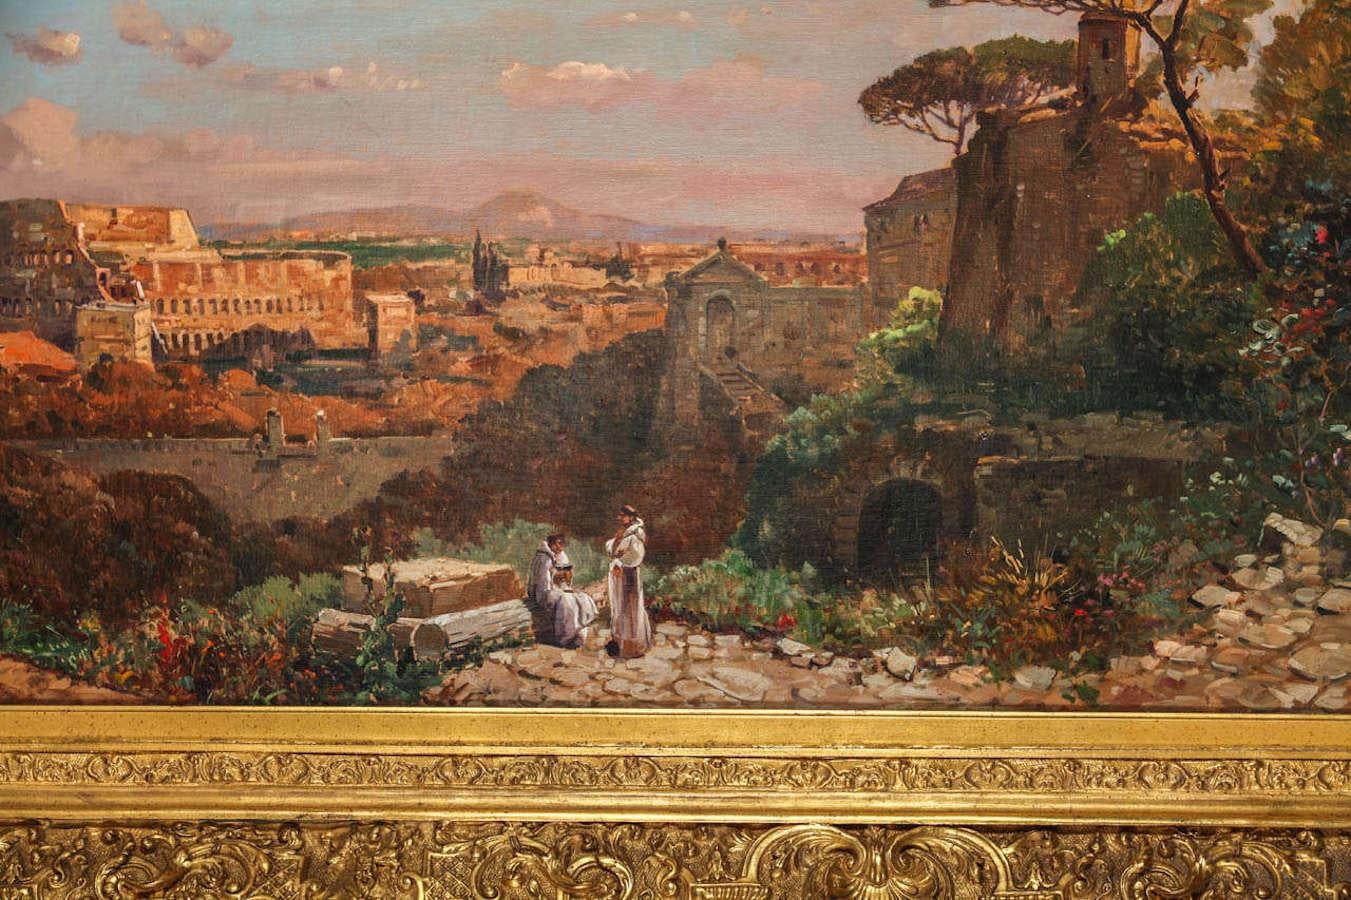 Roman Landscape Depicting the Colosseum and the Via Sacra Oil on Canvas  - Impressionist Painting by Unknown